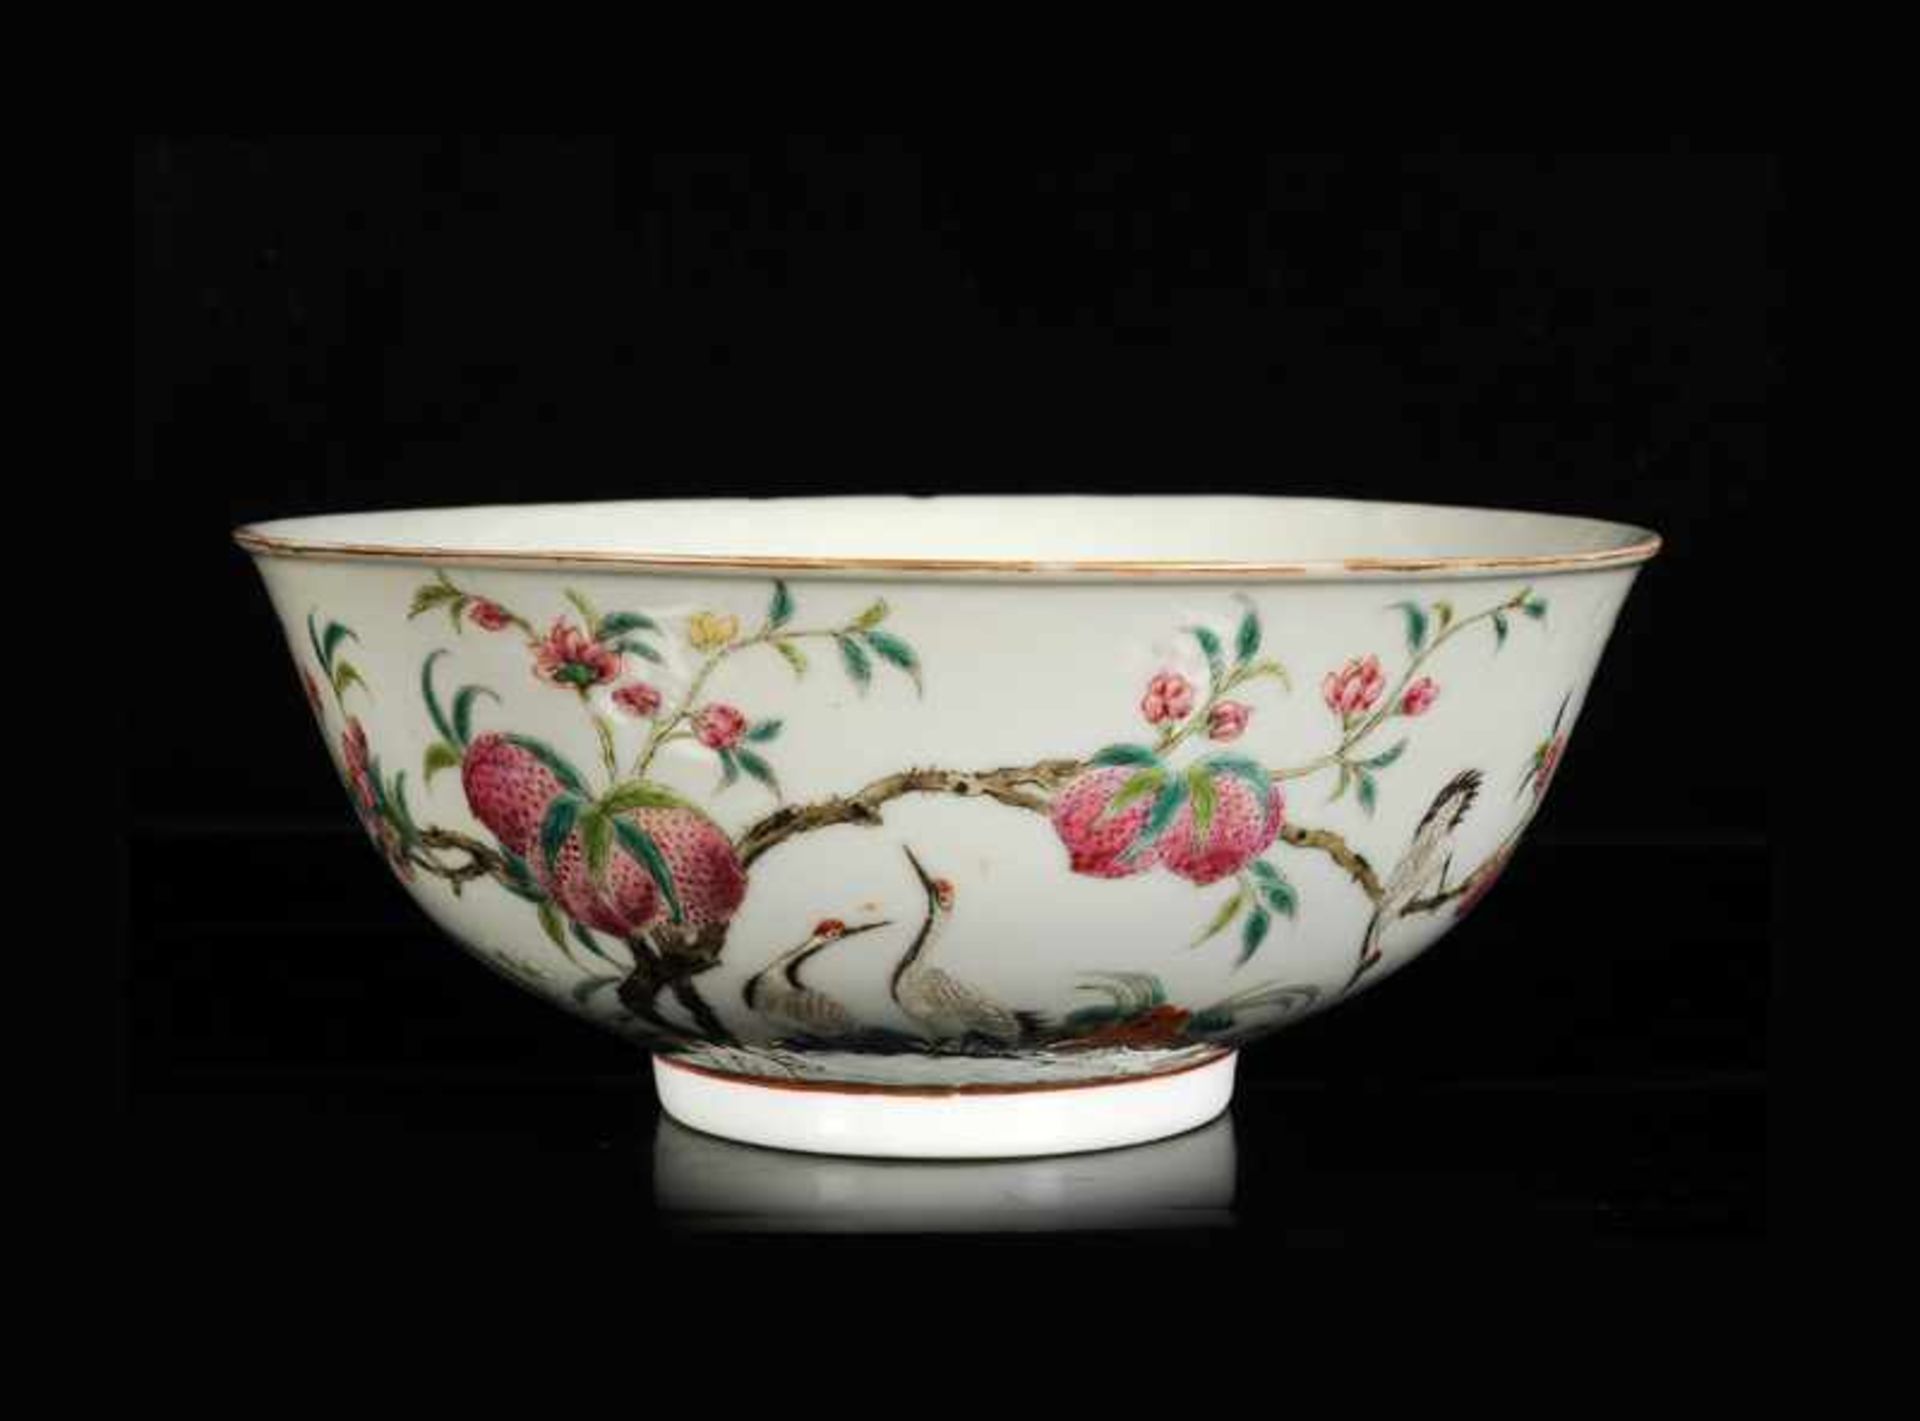 A polychrome porcelain bowl with a decor of peaches and cranes. Marked with six-character mark